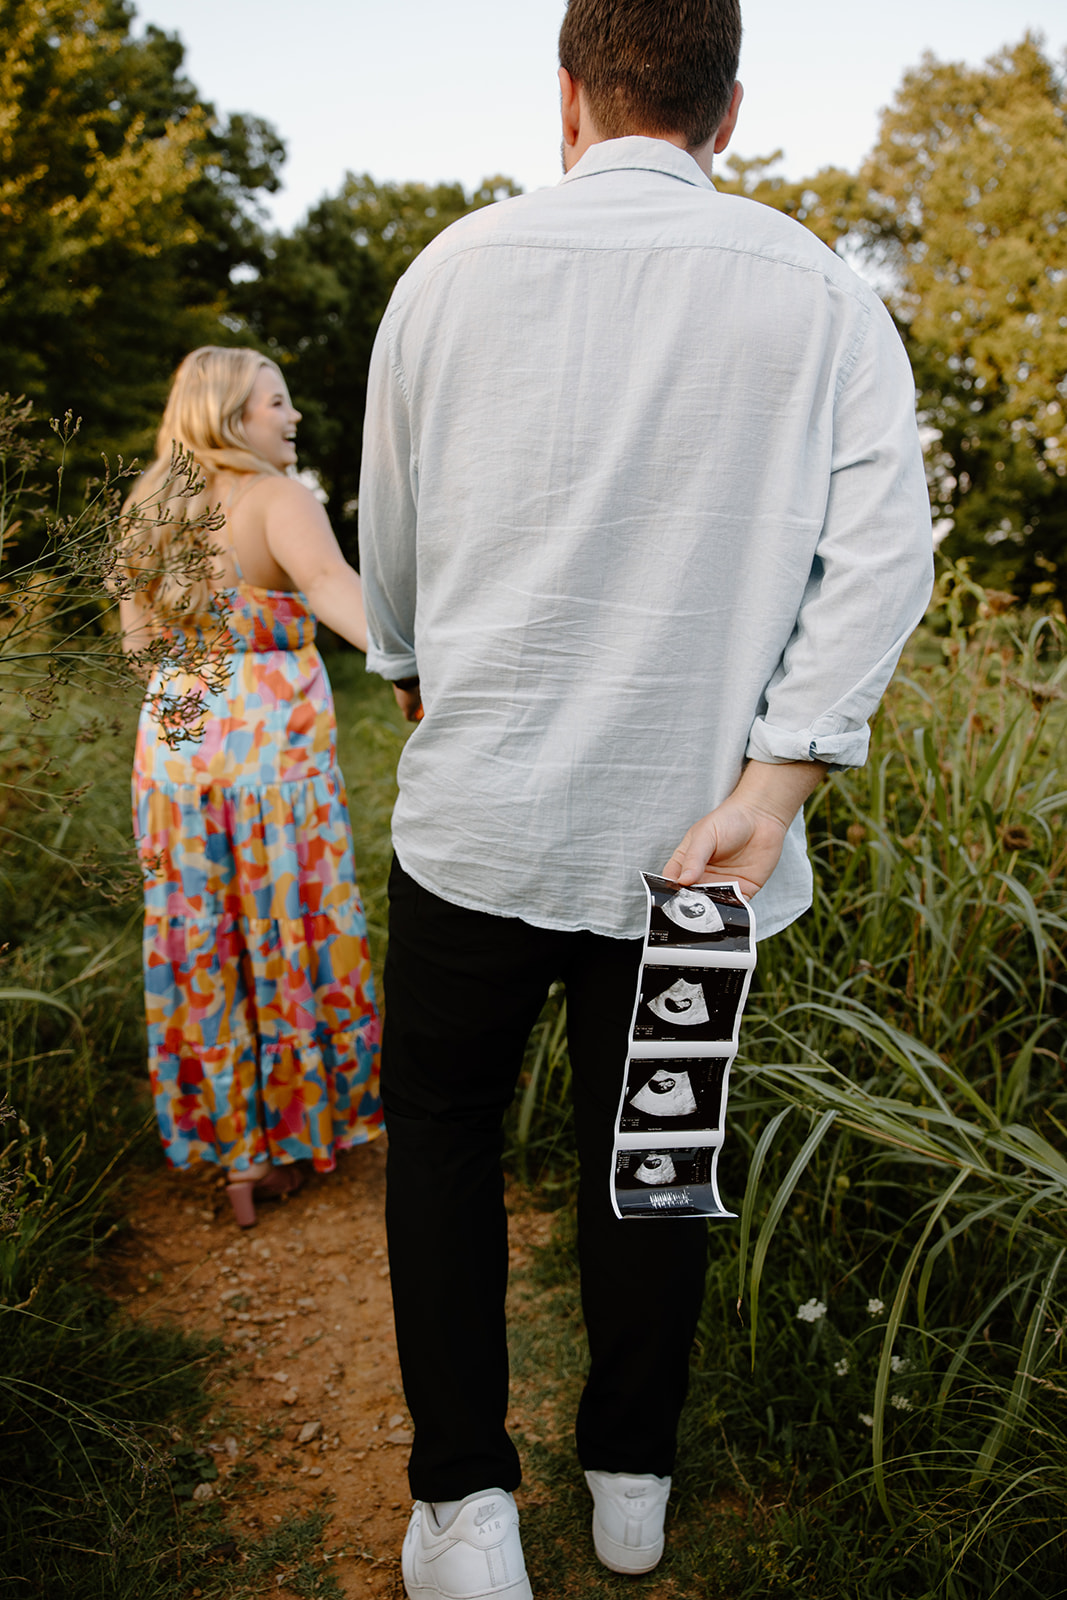 Pregnancy announcement pictures in a field.